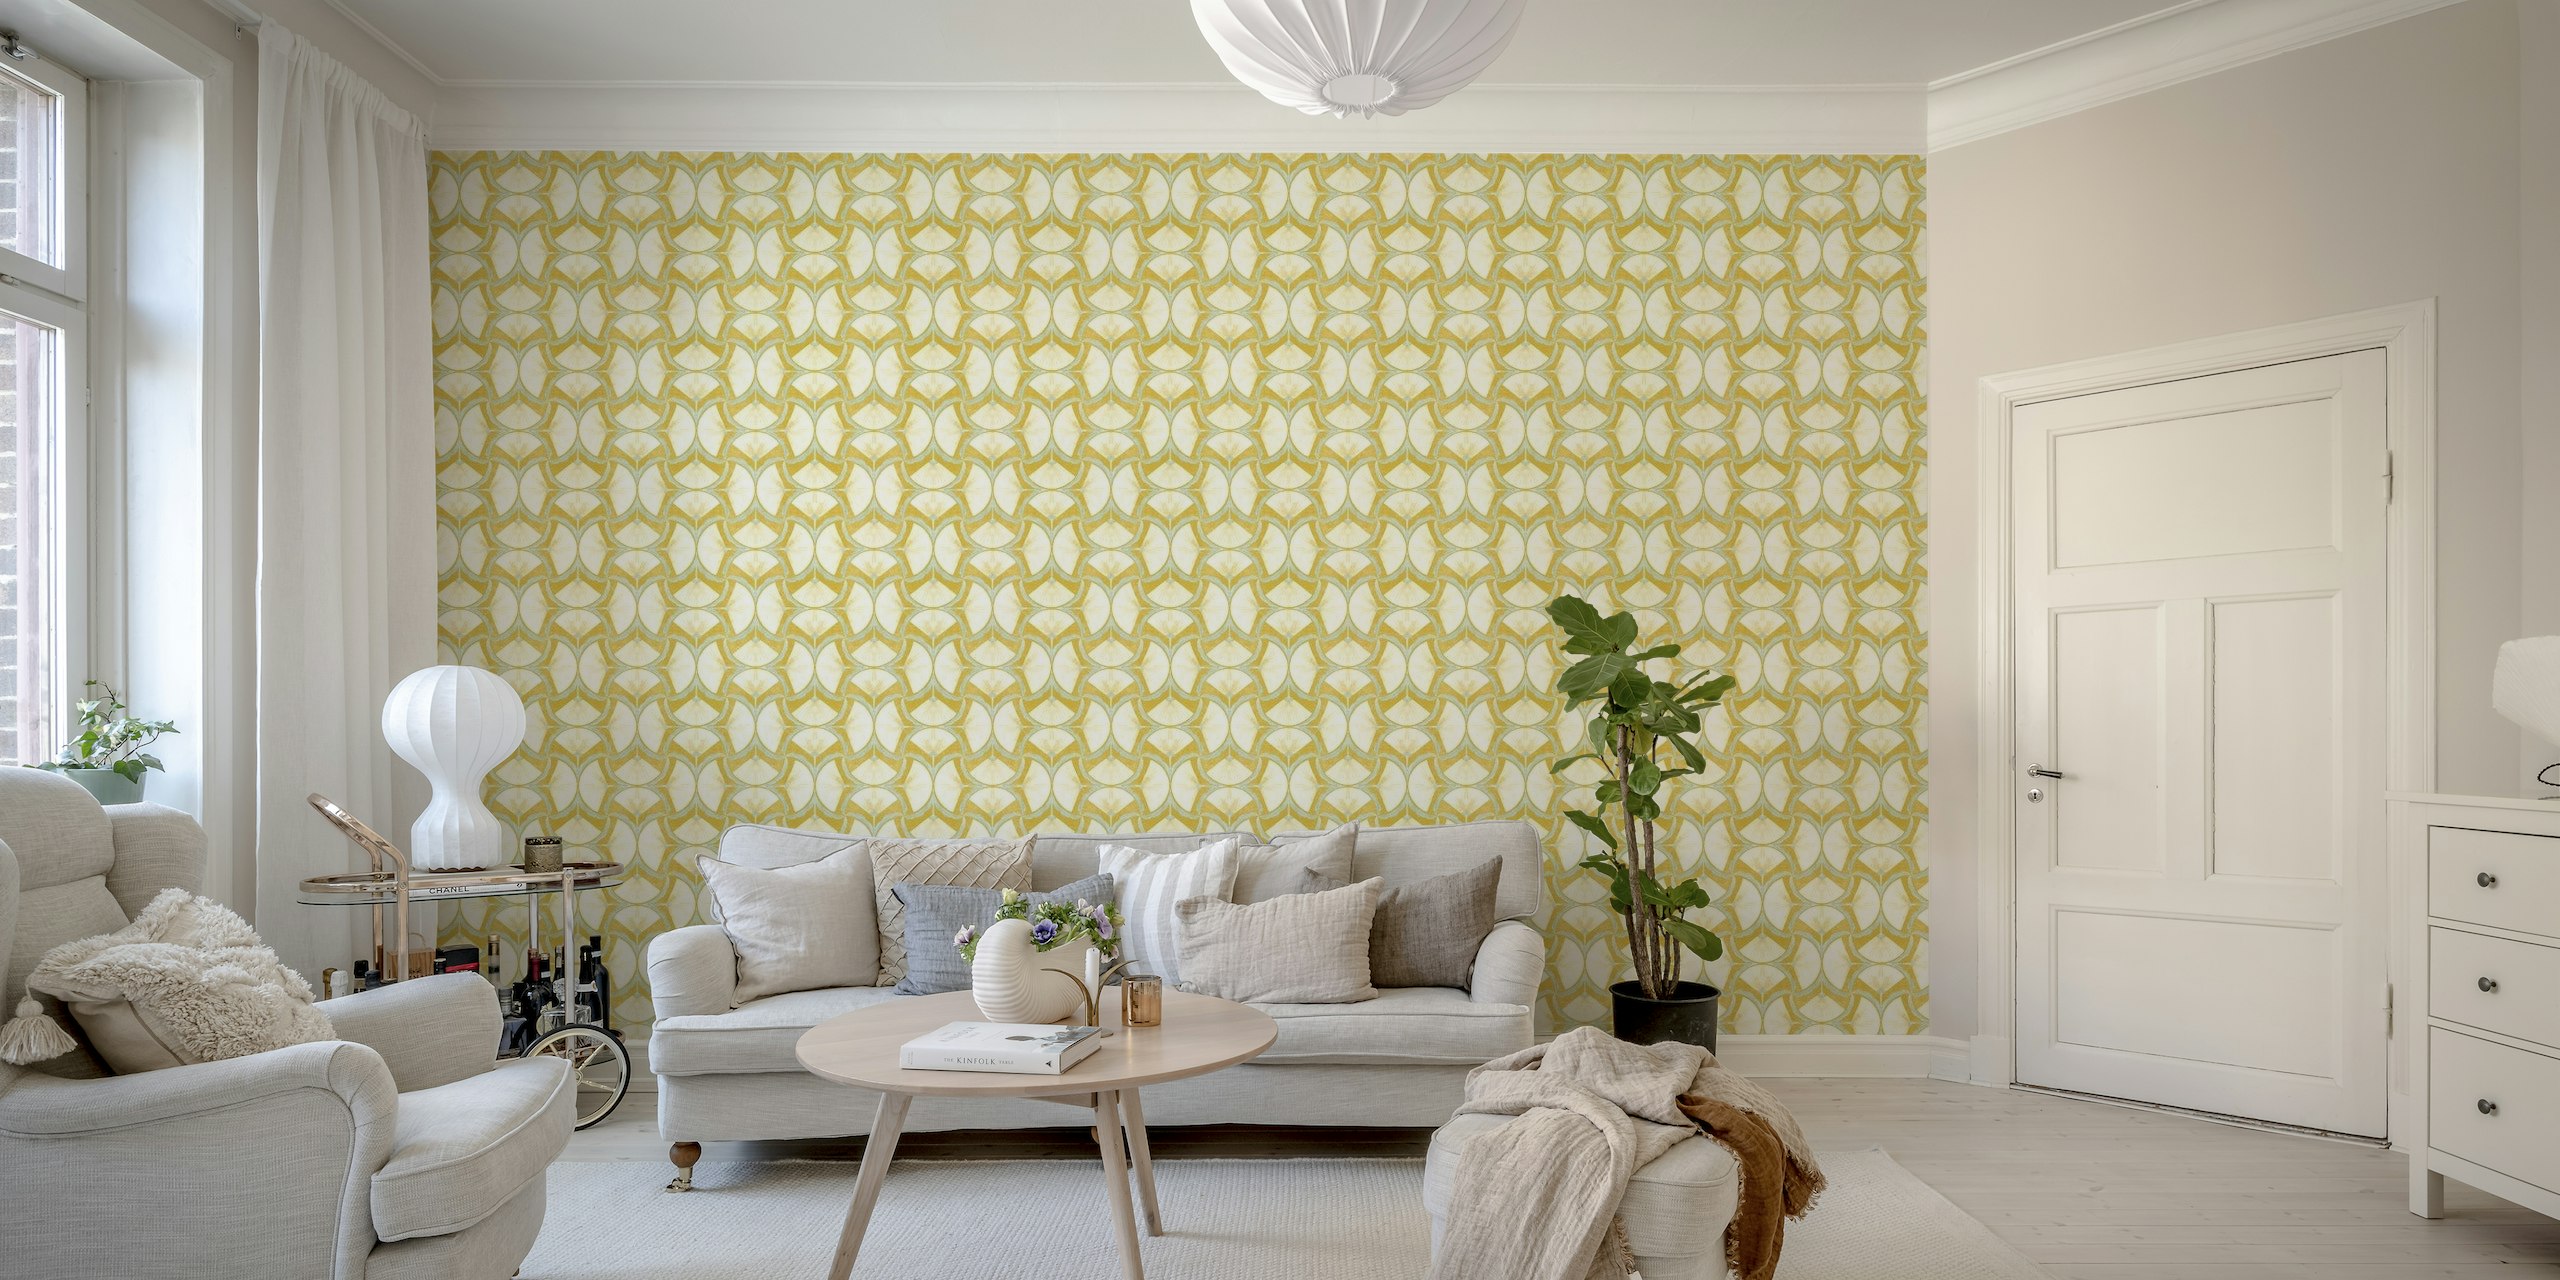 Floral Harmony: Delicate Hand-Drawn Symmetry on mustard background ταπετσαρία